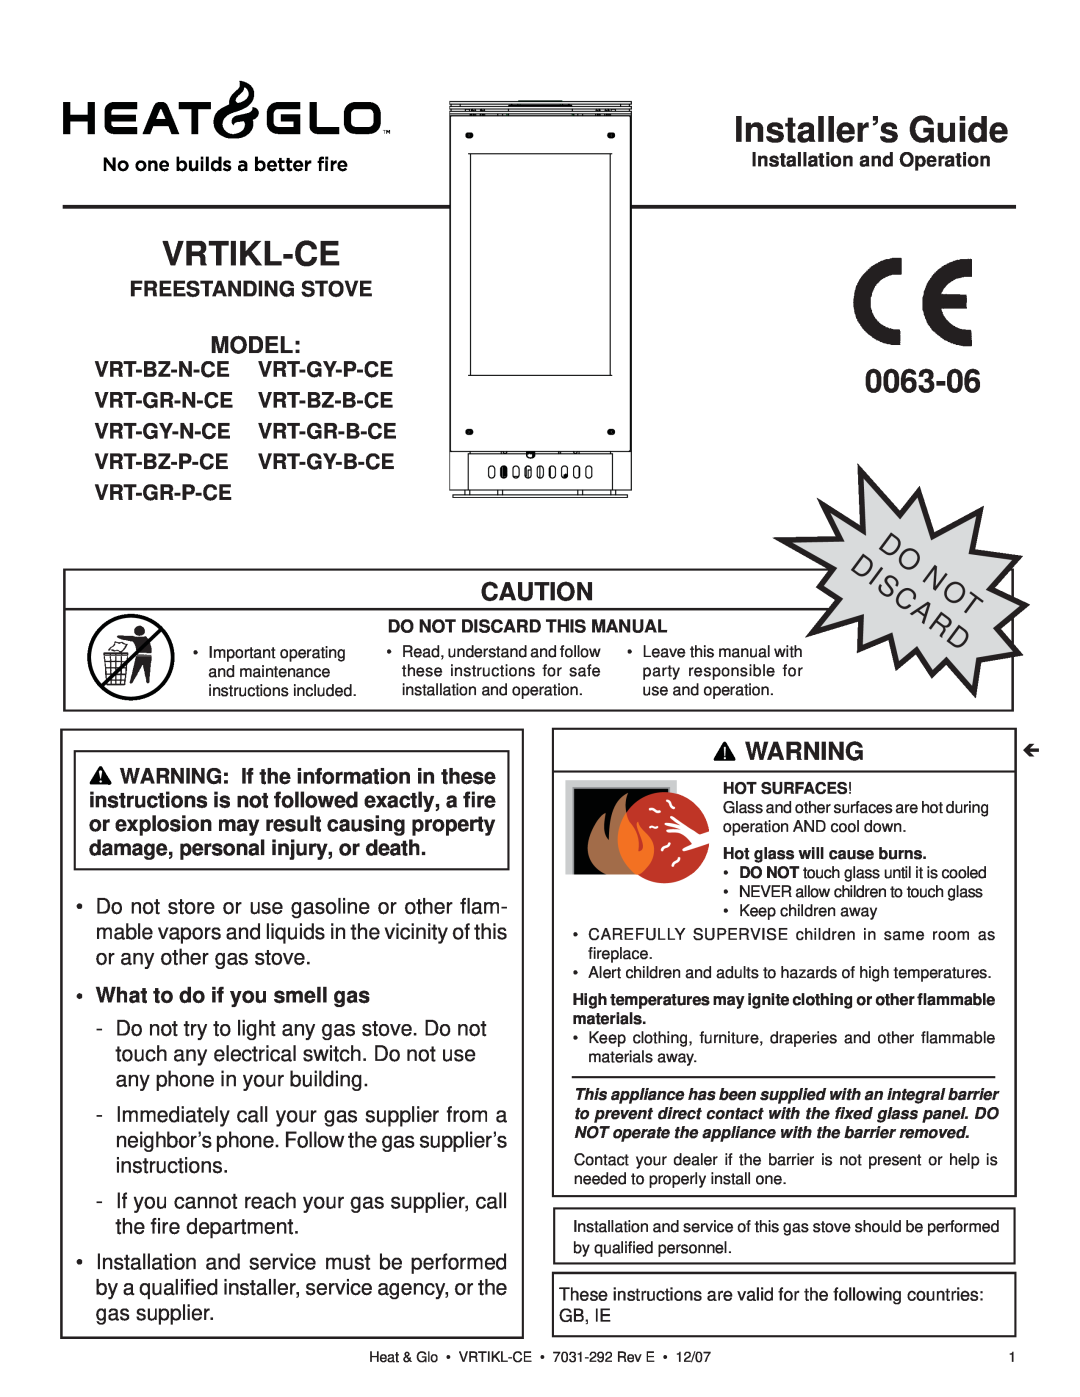 Hearth and Home Technologies VRT-GY-P-CE manual 0063-06, Freestanding Stove, What to do if you smell gas, Vrtikl-Ce, Model 